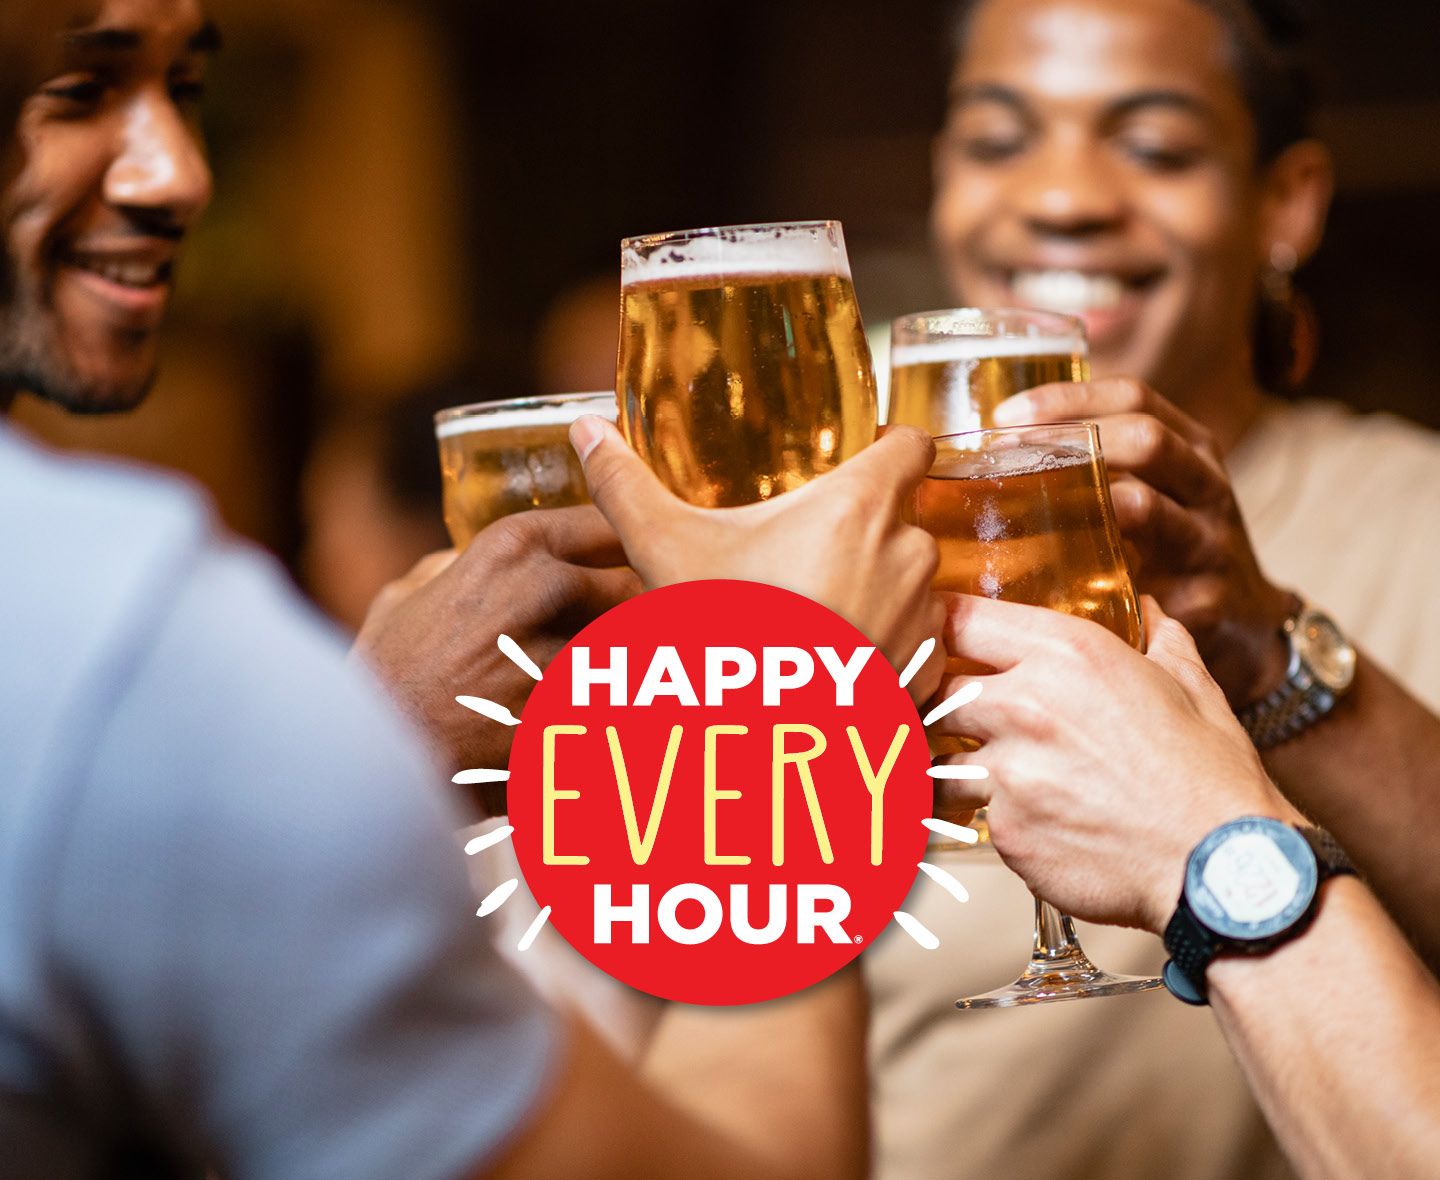 It's always a good time at TGI Fridays with our Happy Hour featuring $4 cocktails and $2 beer, all day, every day. And now, look forward to Wing Night Mondays with 50 cent wings from 5 pm-close EVERY Monday. Dine-In only. See restaurant for details.